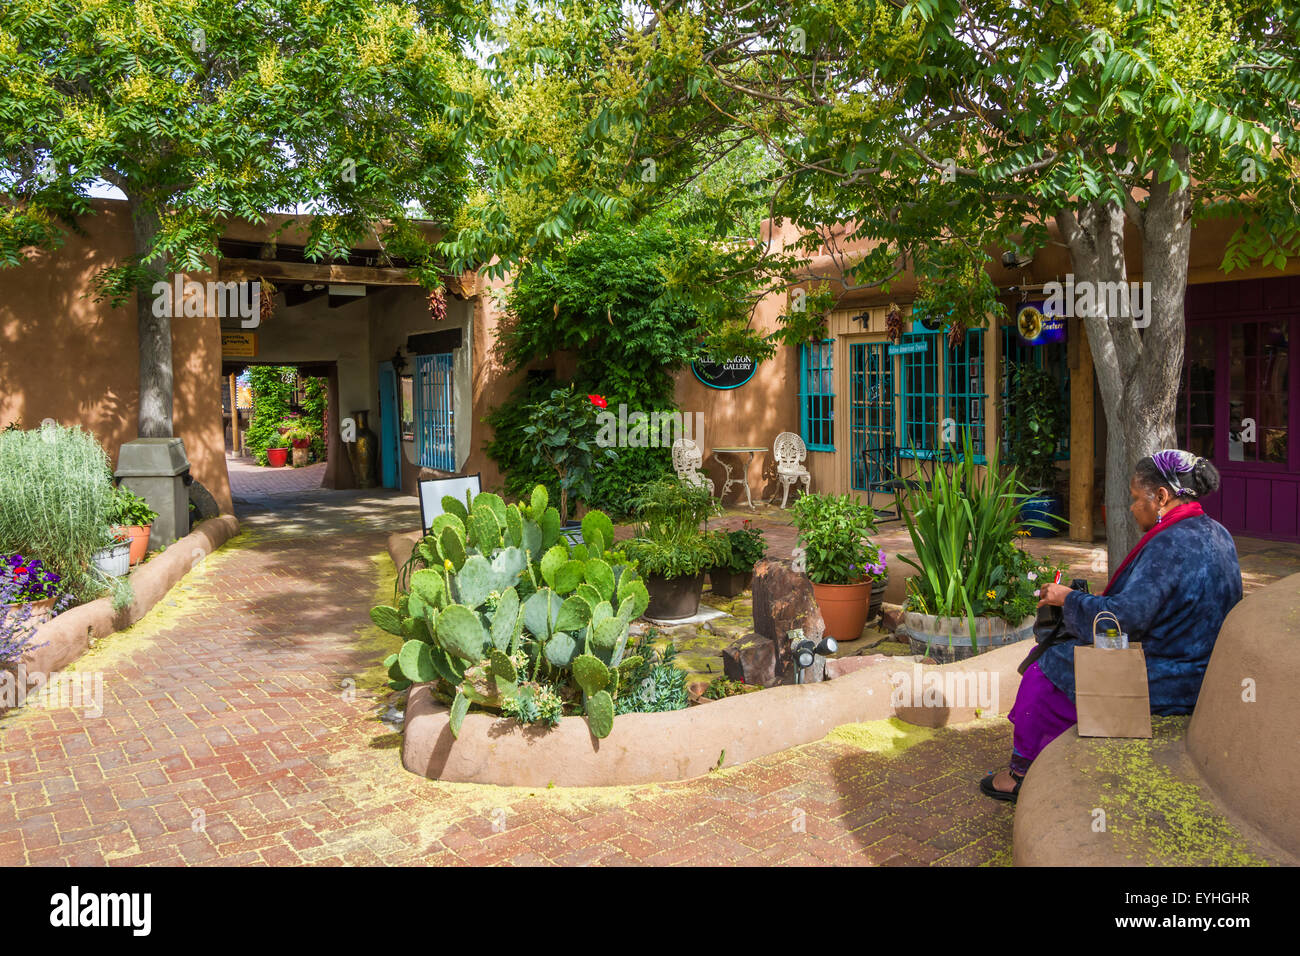 Shops and stores in Old Town Albuquerque, New Mexico, USA. Stock Photo